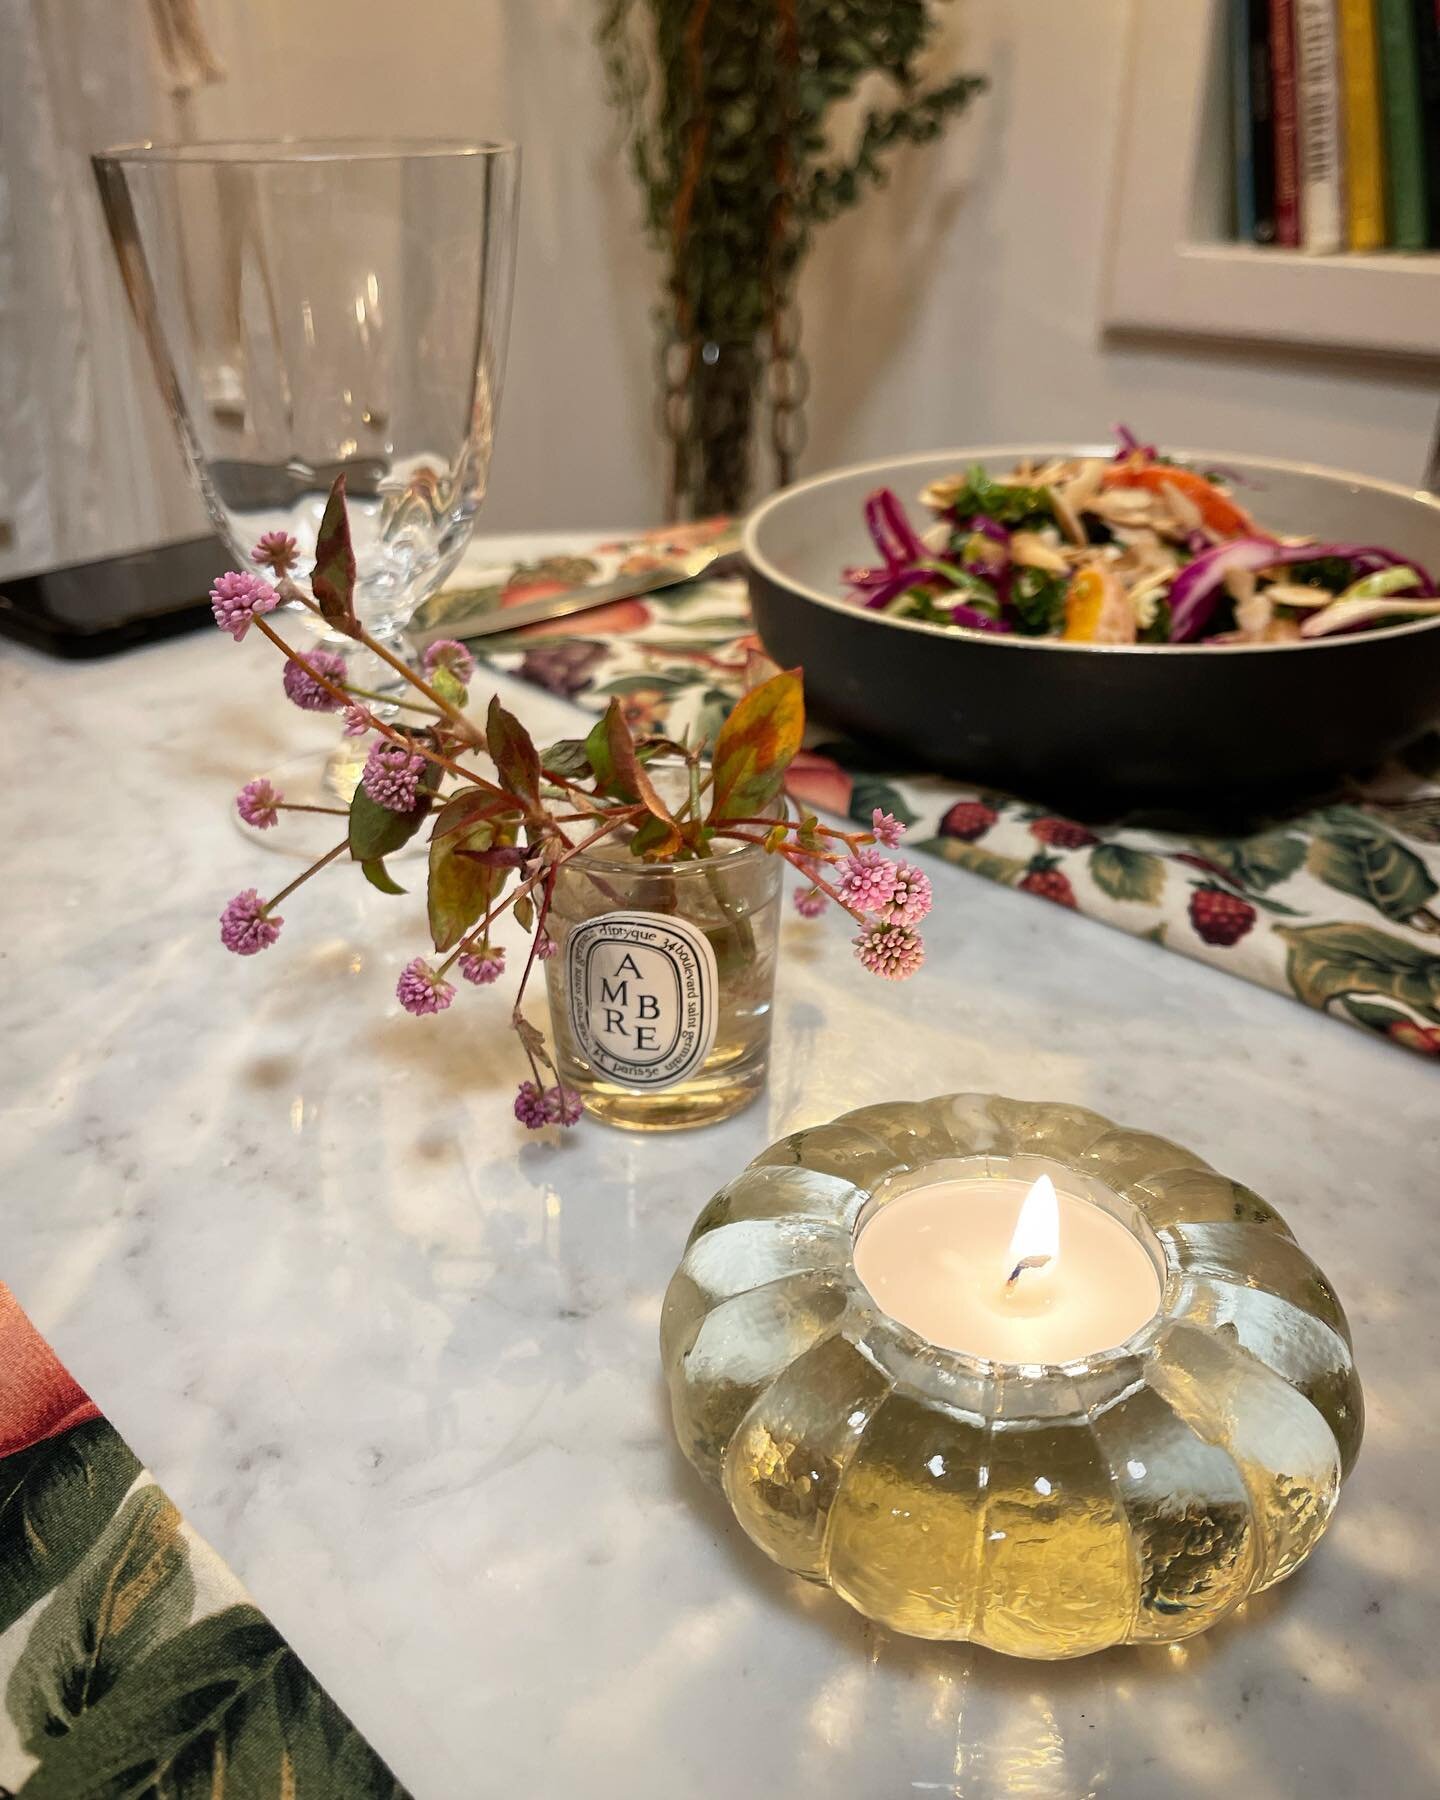 Whoa O &hellip; Amber is the color of my energy ✨ foraged florals and candle light elevates any table and meal. Bonus for reusing candle vessels, in this case for mini bud vase.